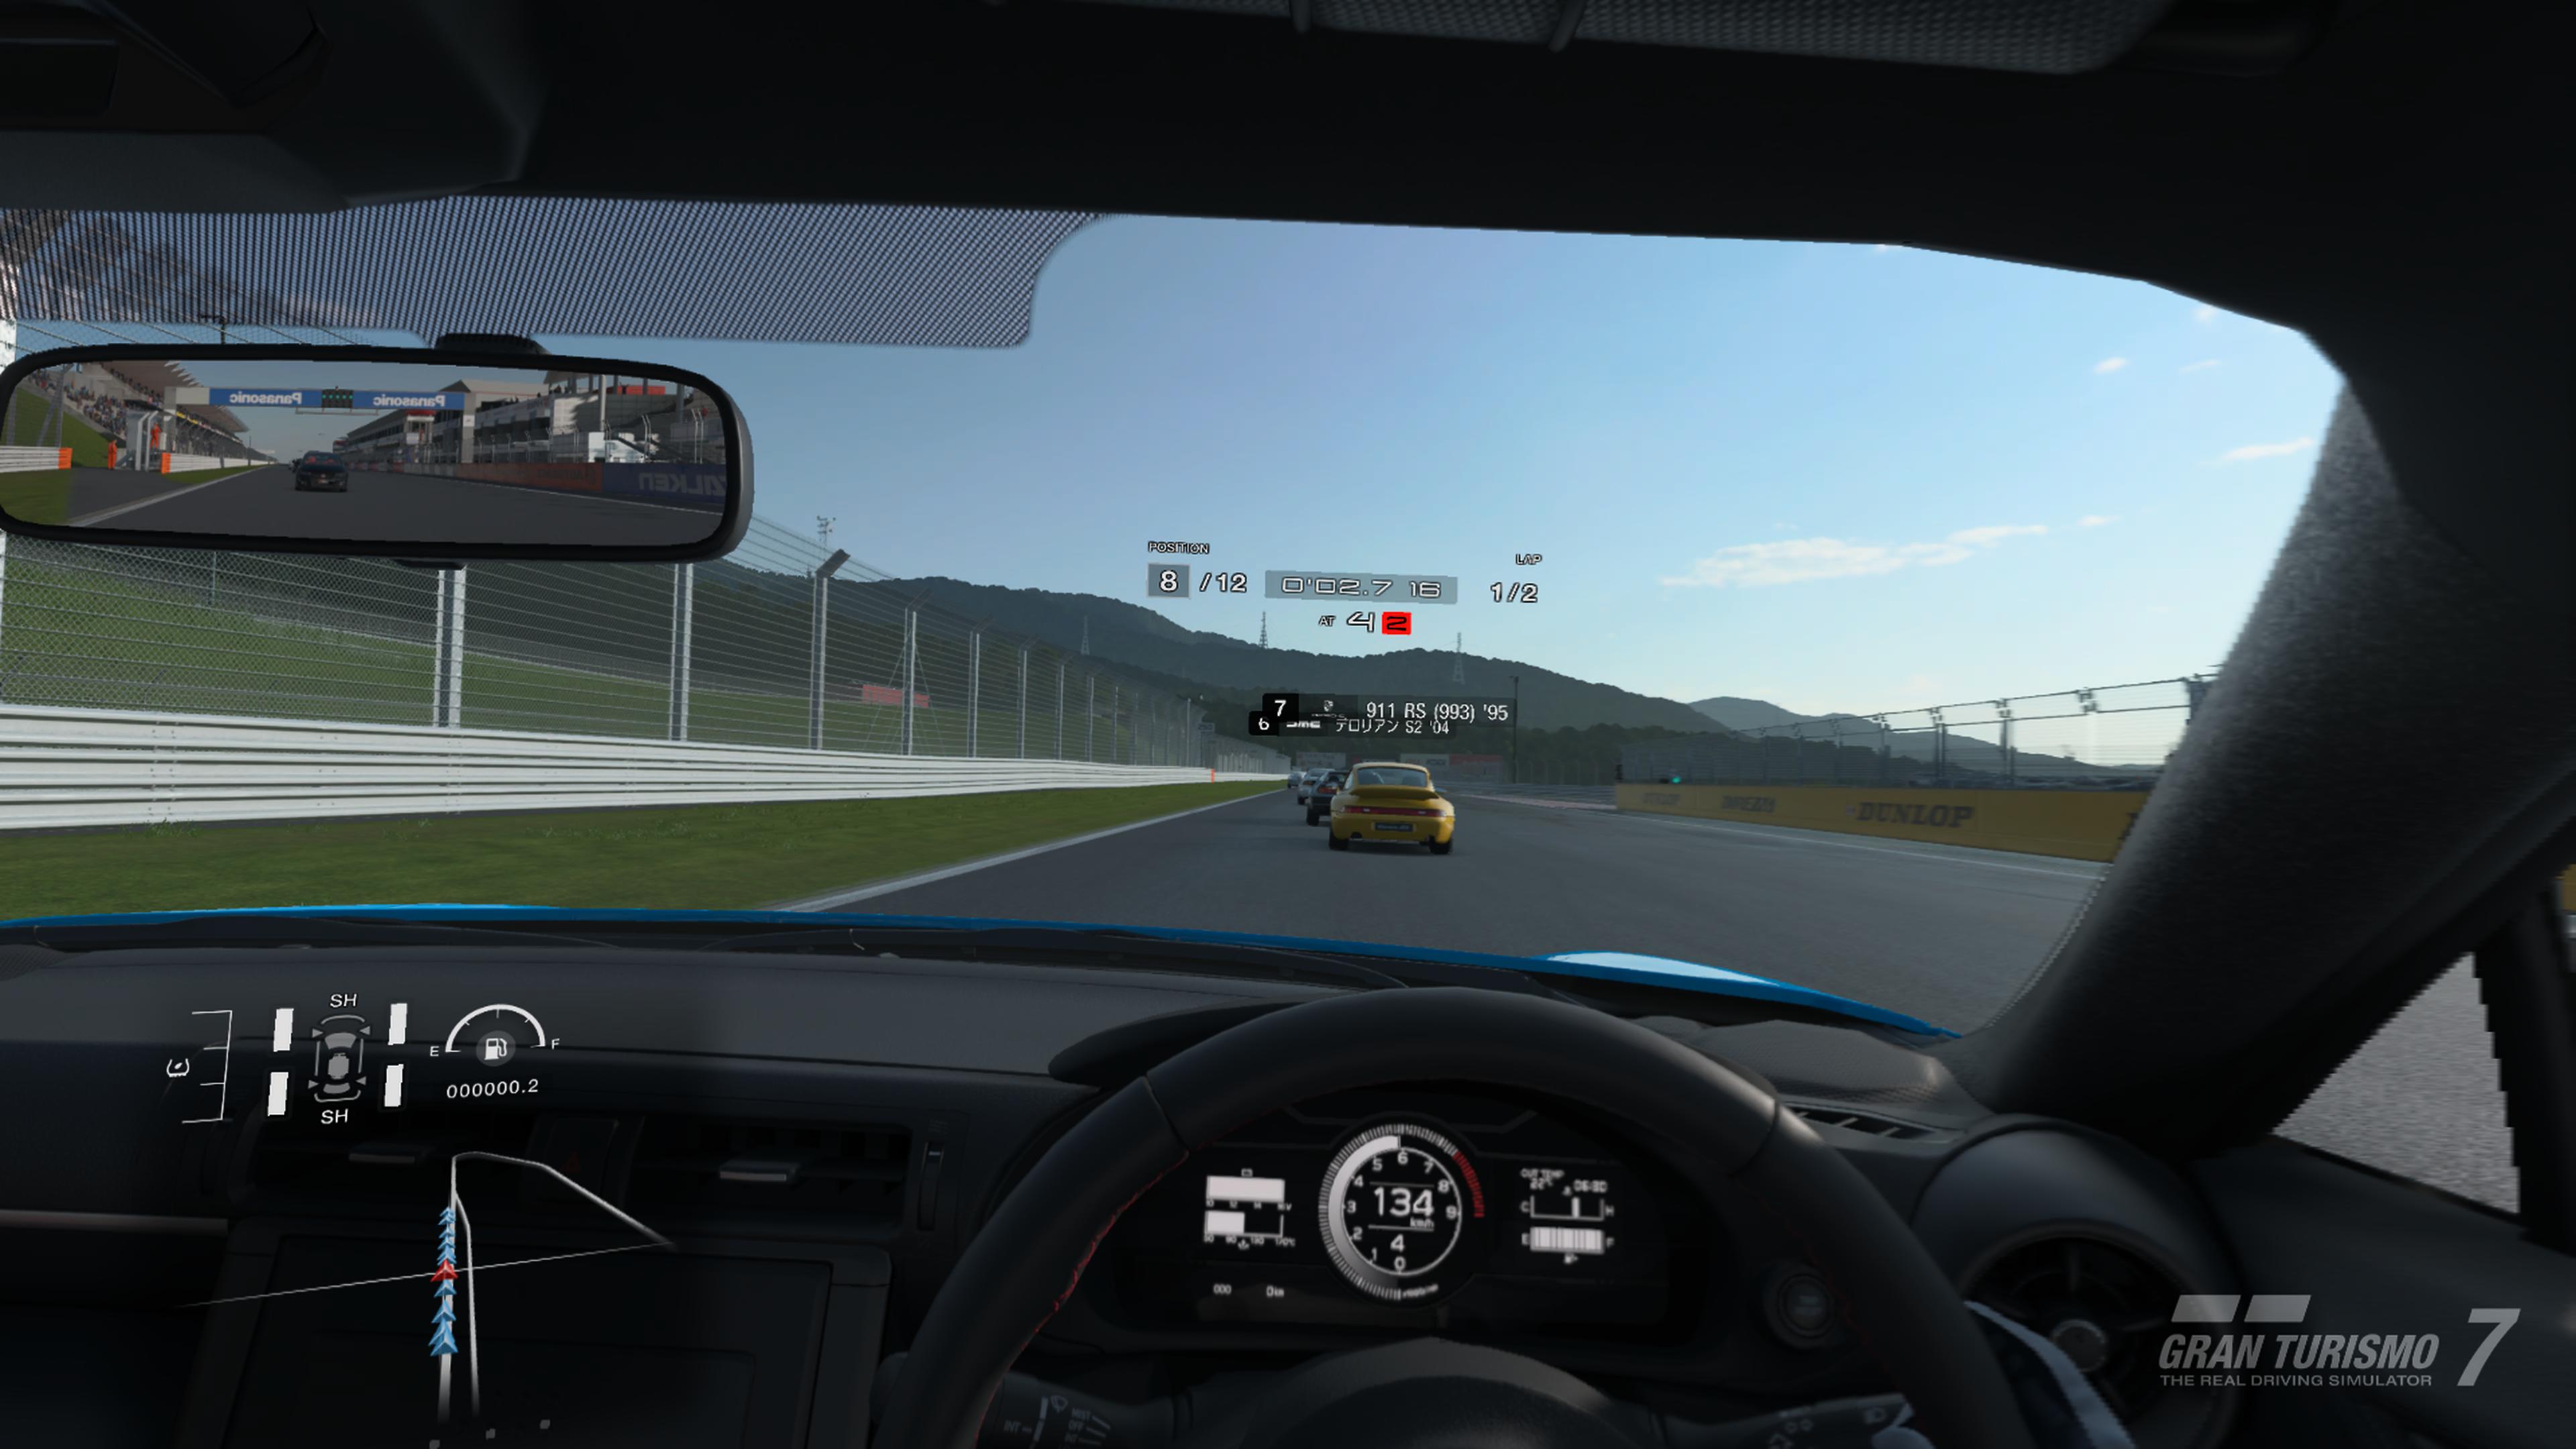 The Low-Down on Gran Turismo 5′s Damage Modeling